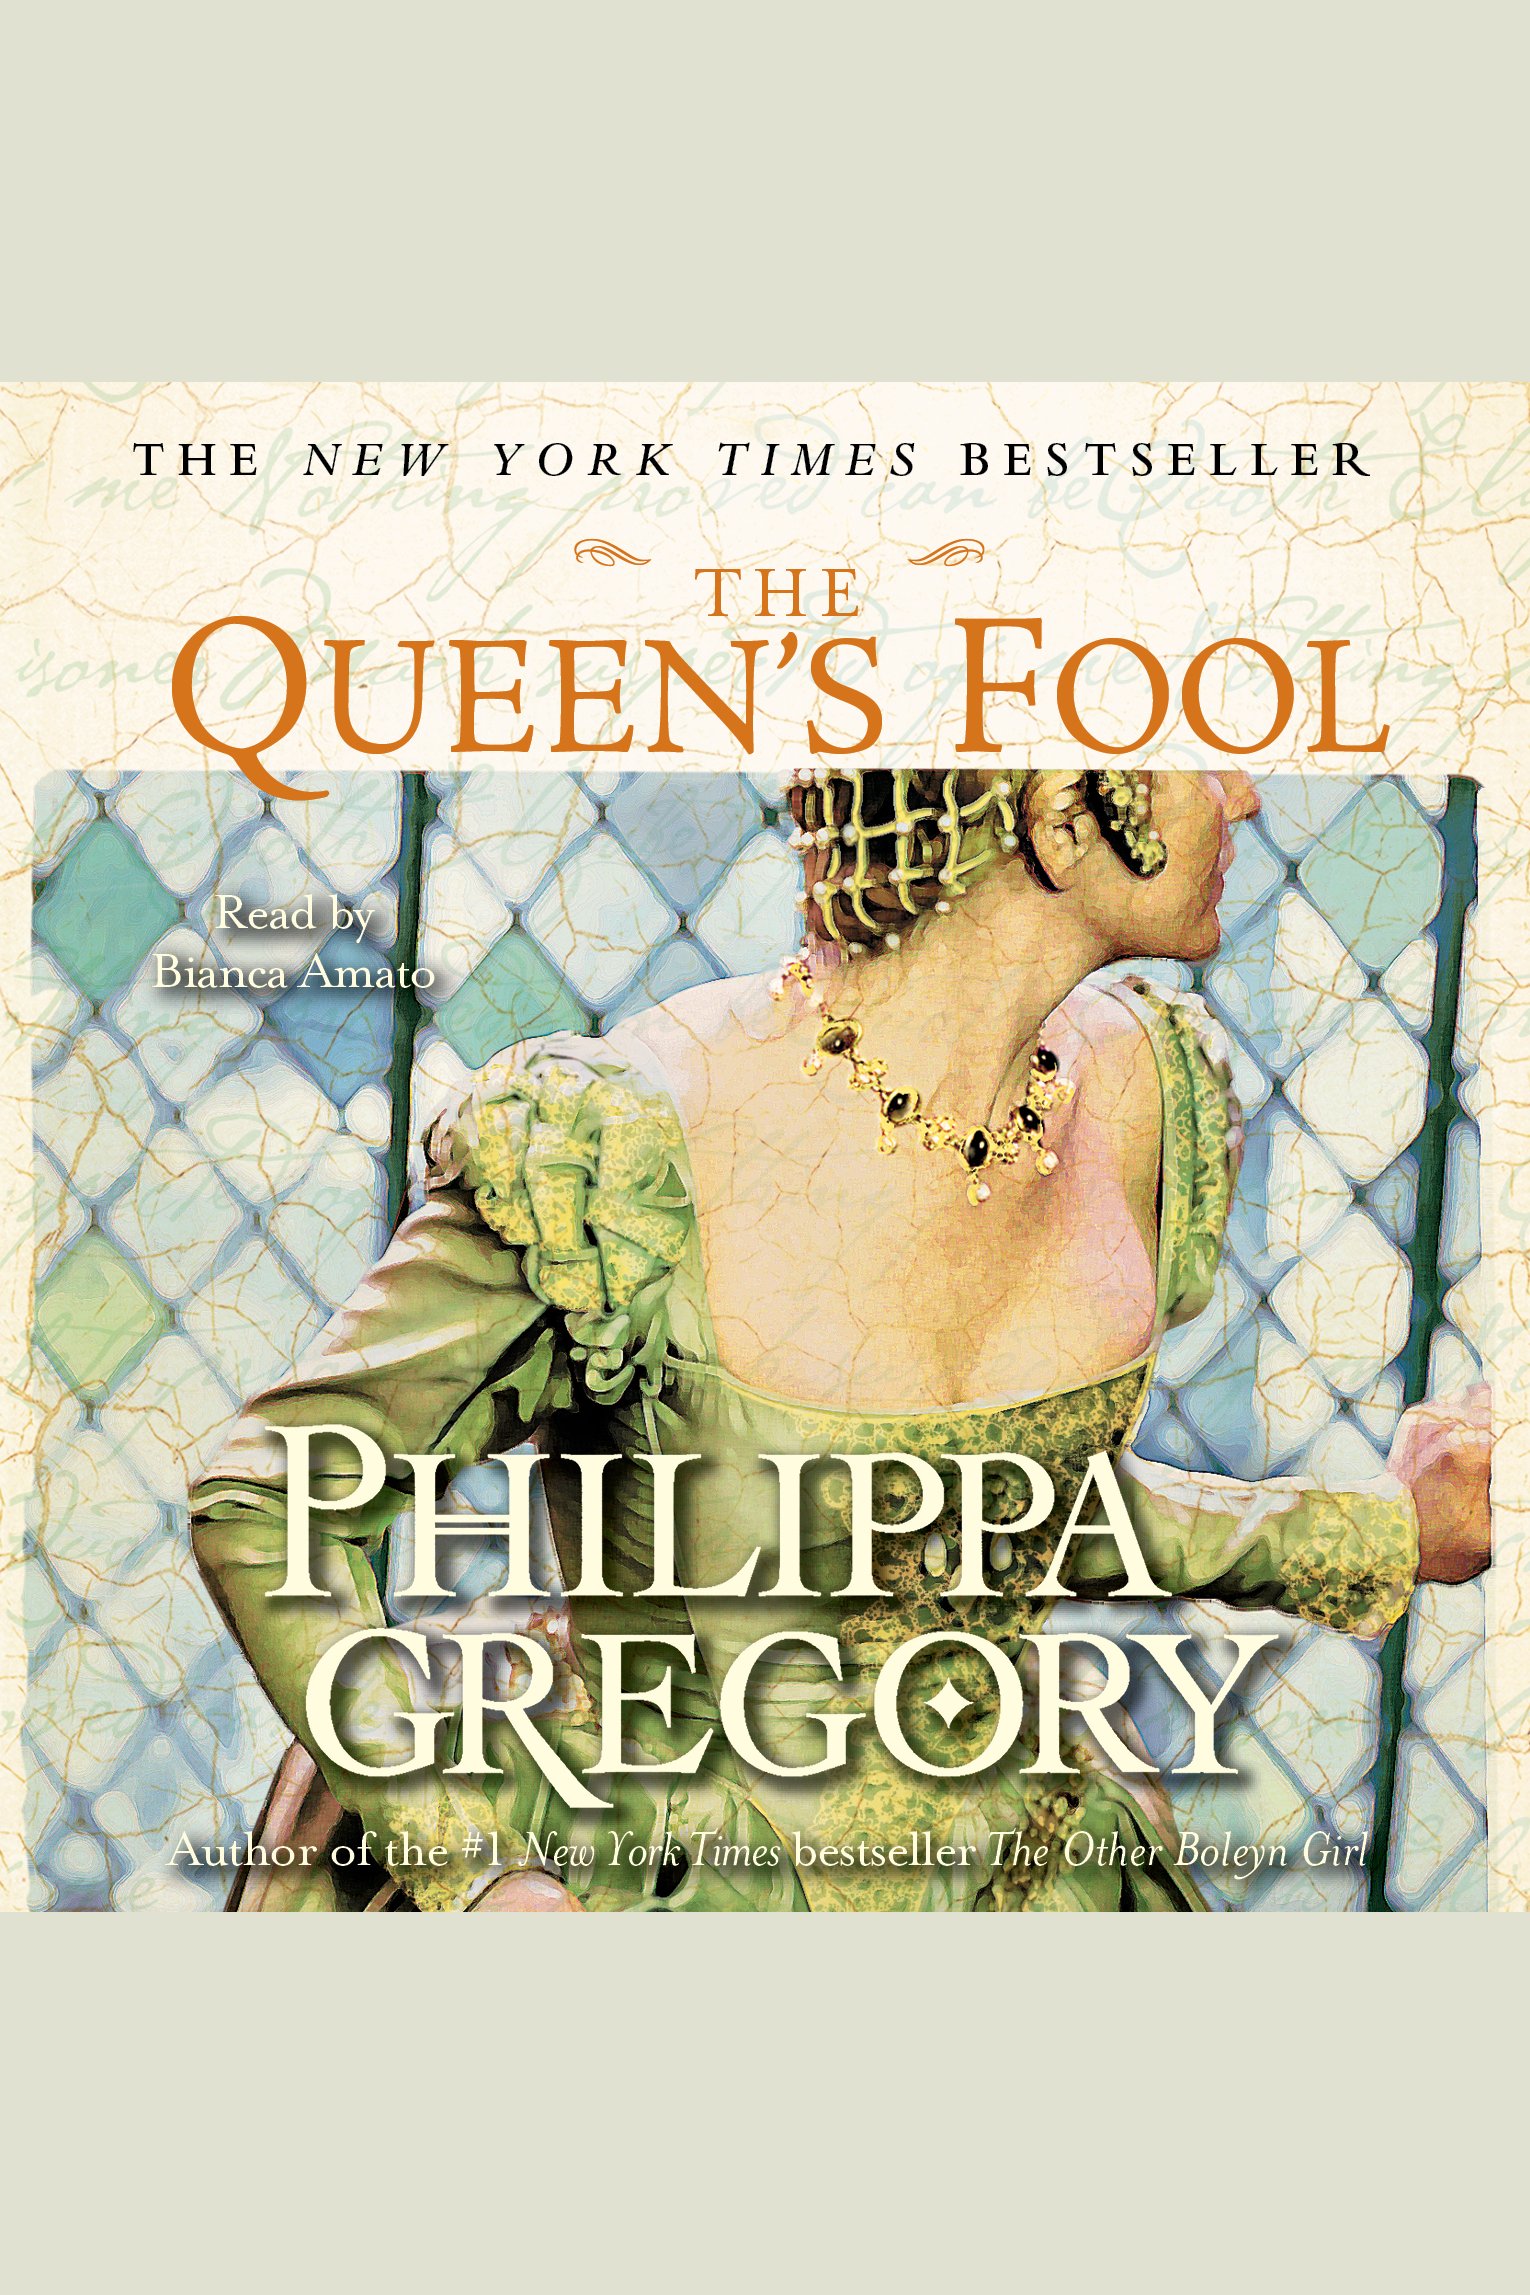 Queen's fool cover image